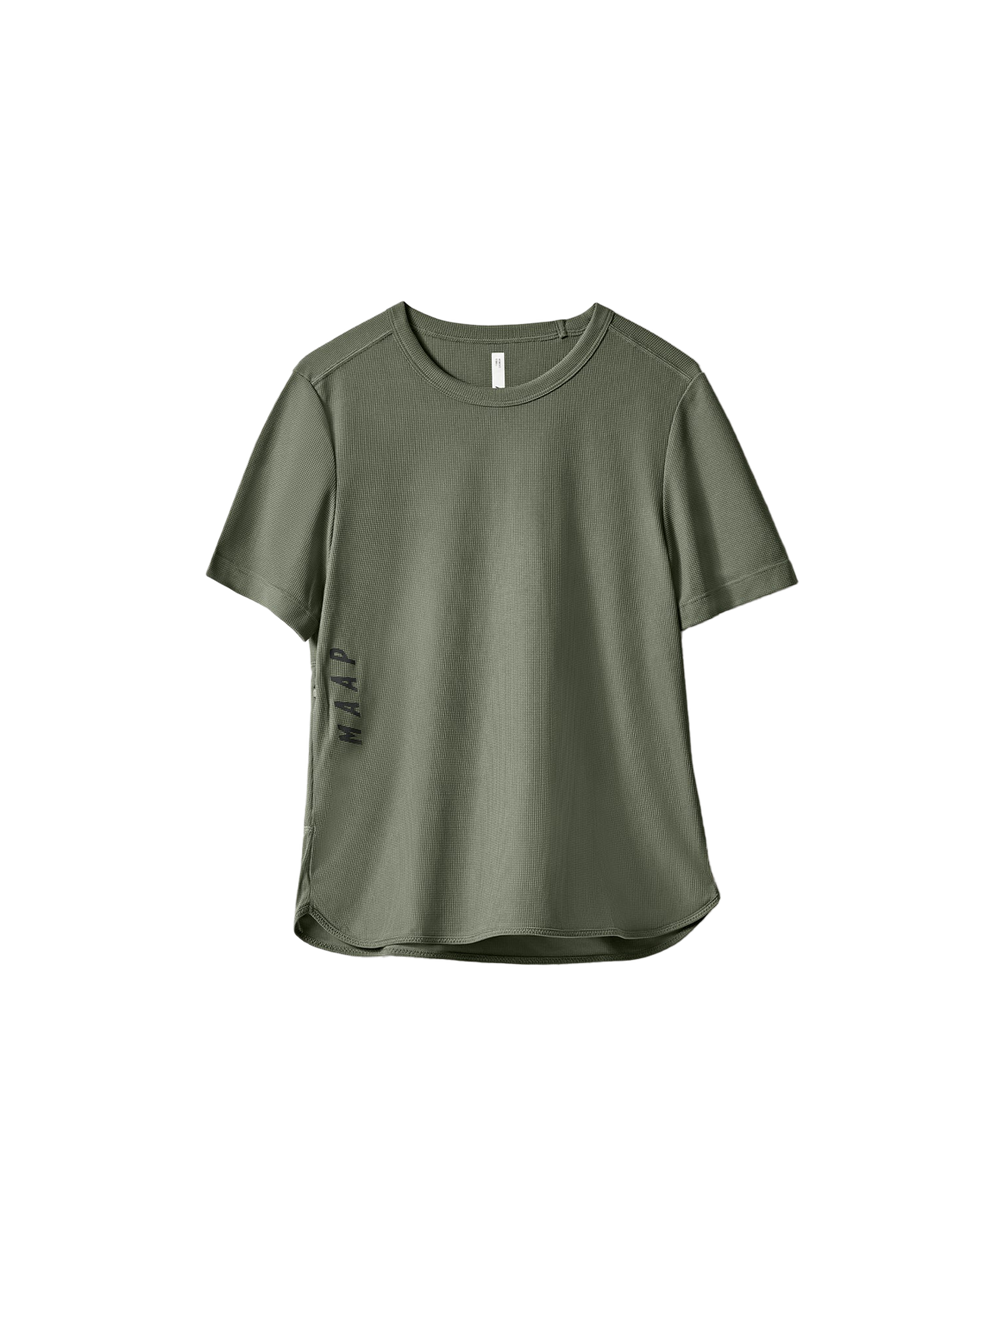 Product Image for Women's Alt_Road Ride Tee 2.0